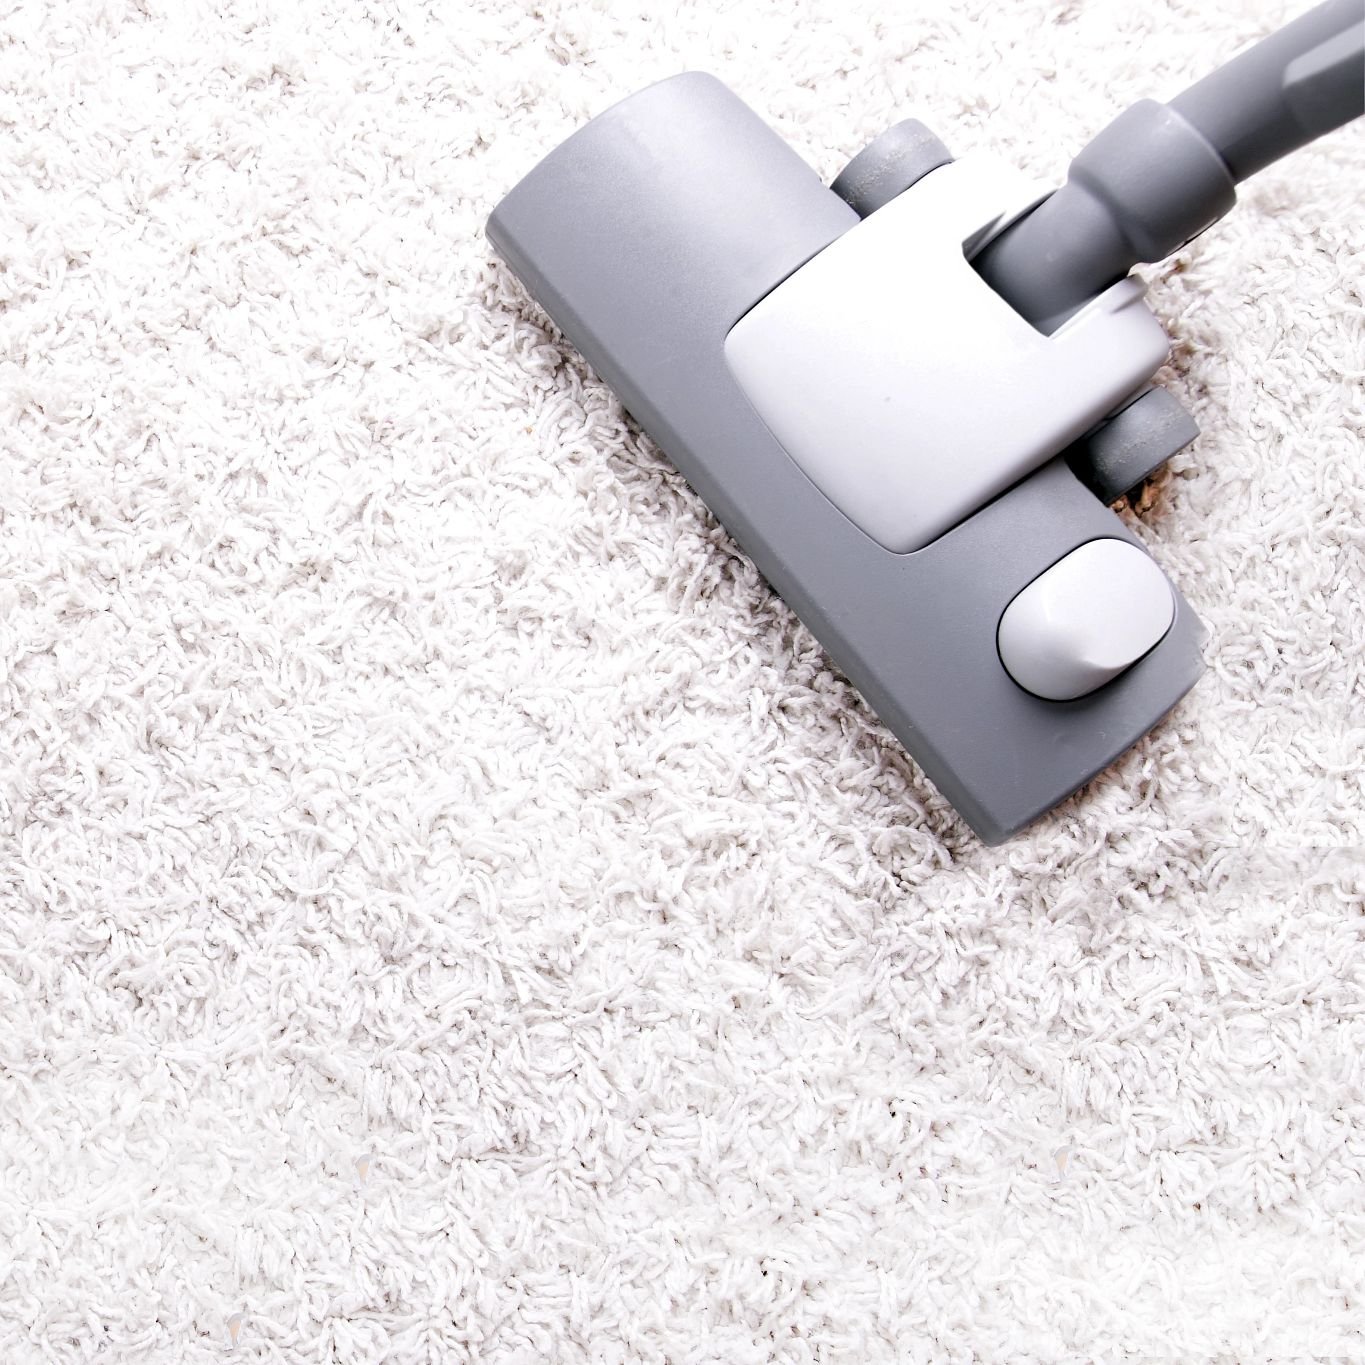 Carpet cleaner on carpet - Carpet & tile cleaning services offered by The Carpet Shoppe Inc in Tulare, CA